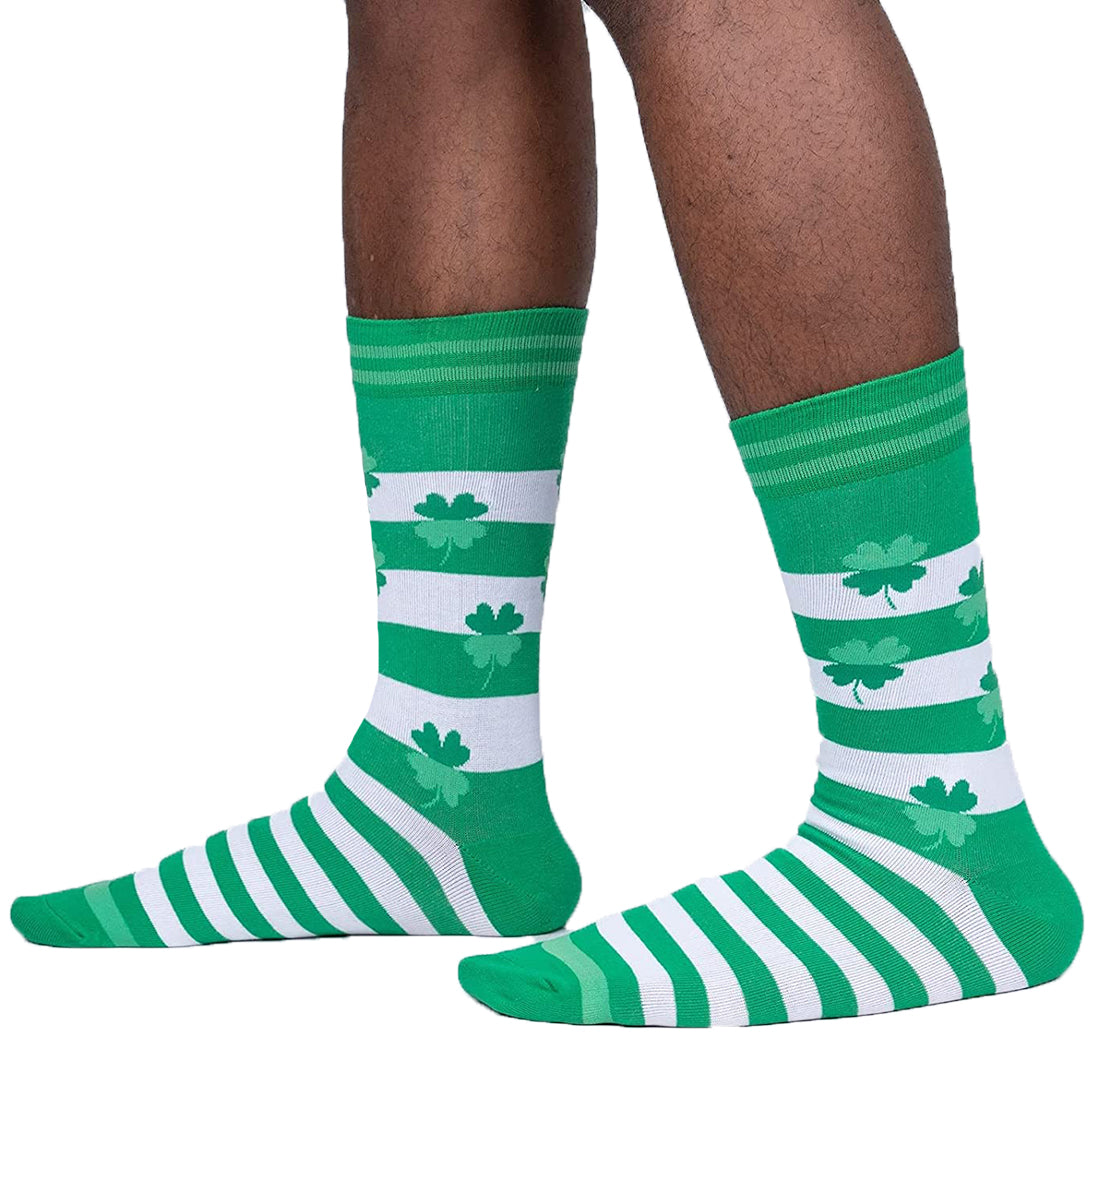 SOCK it to me Men's Crew Socks (MEF0574),Lucky You - Lucky You,One Size